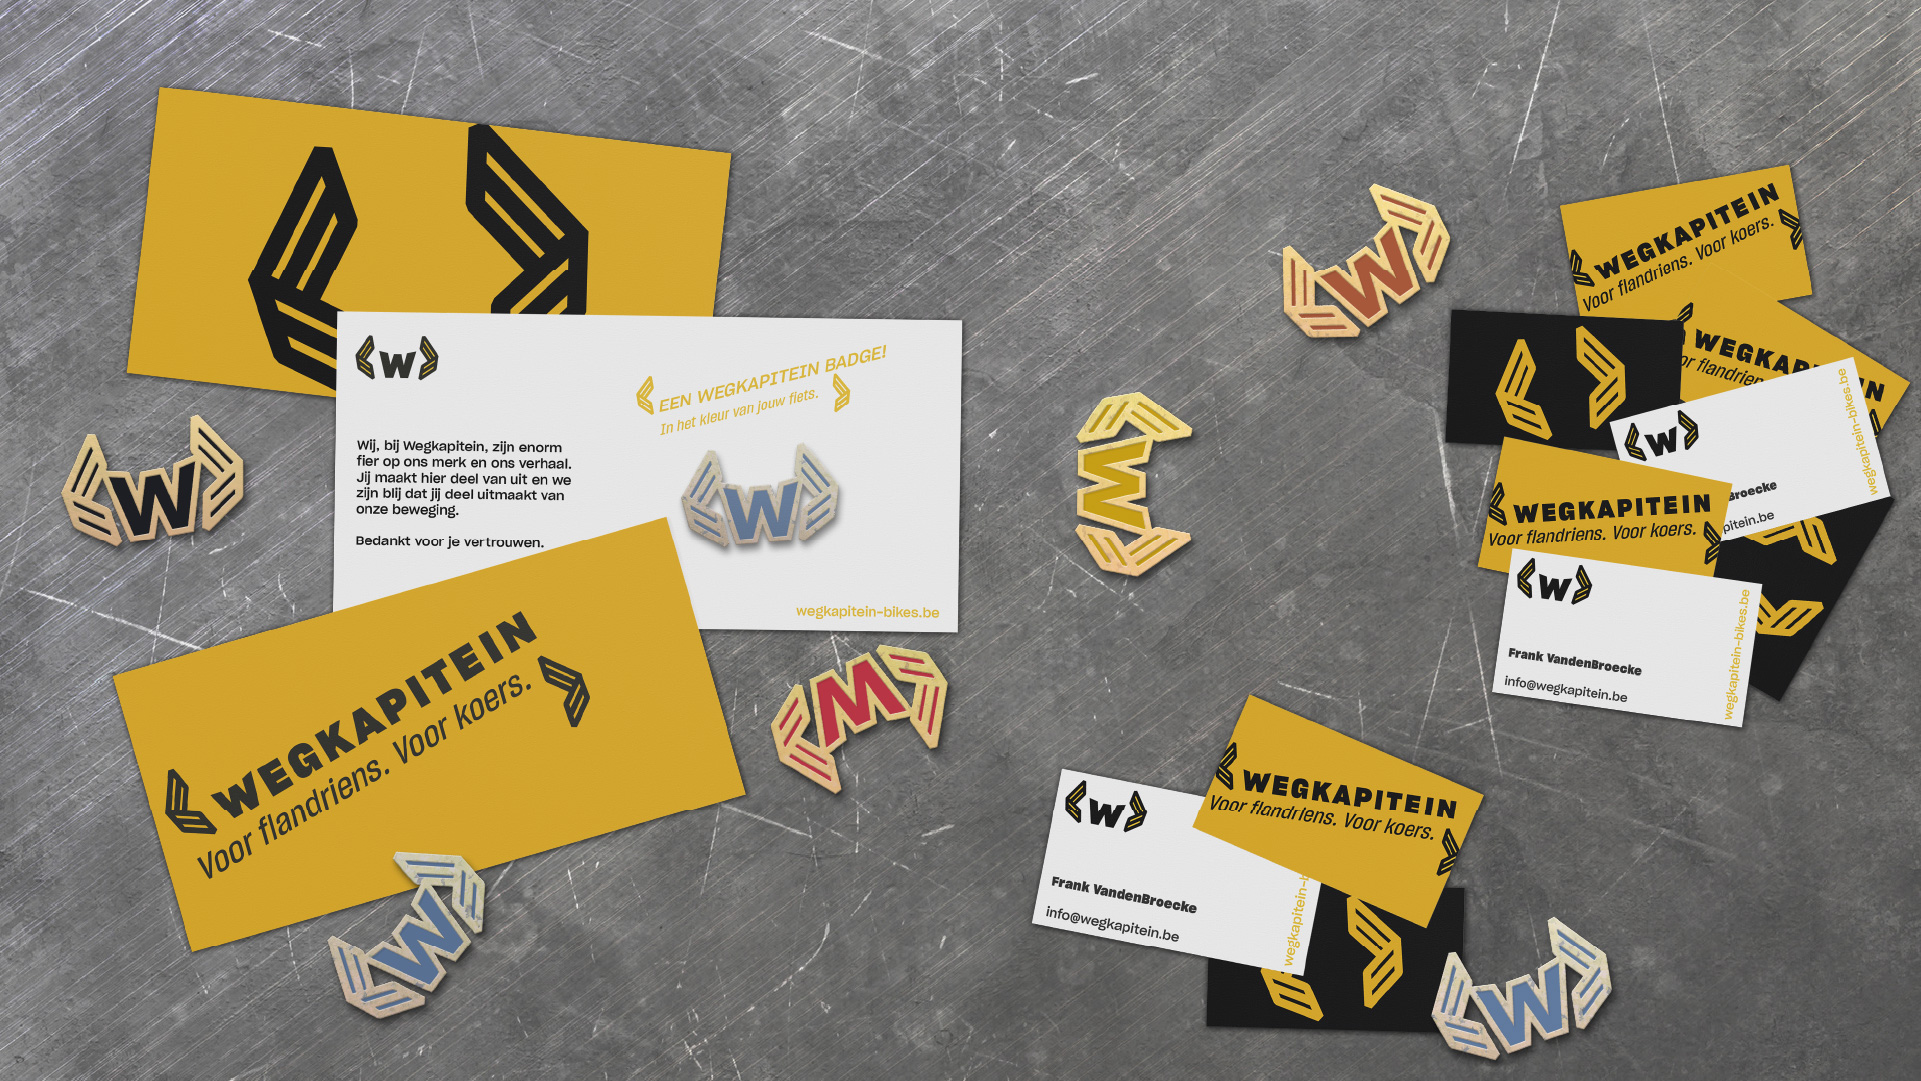 Collection of printed material like business cards and comp slips and enamel pins of the logo